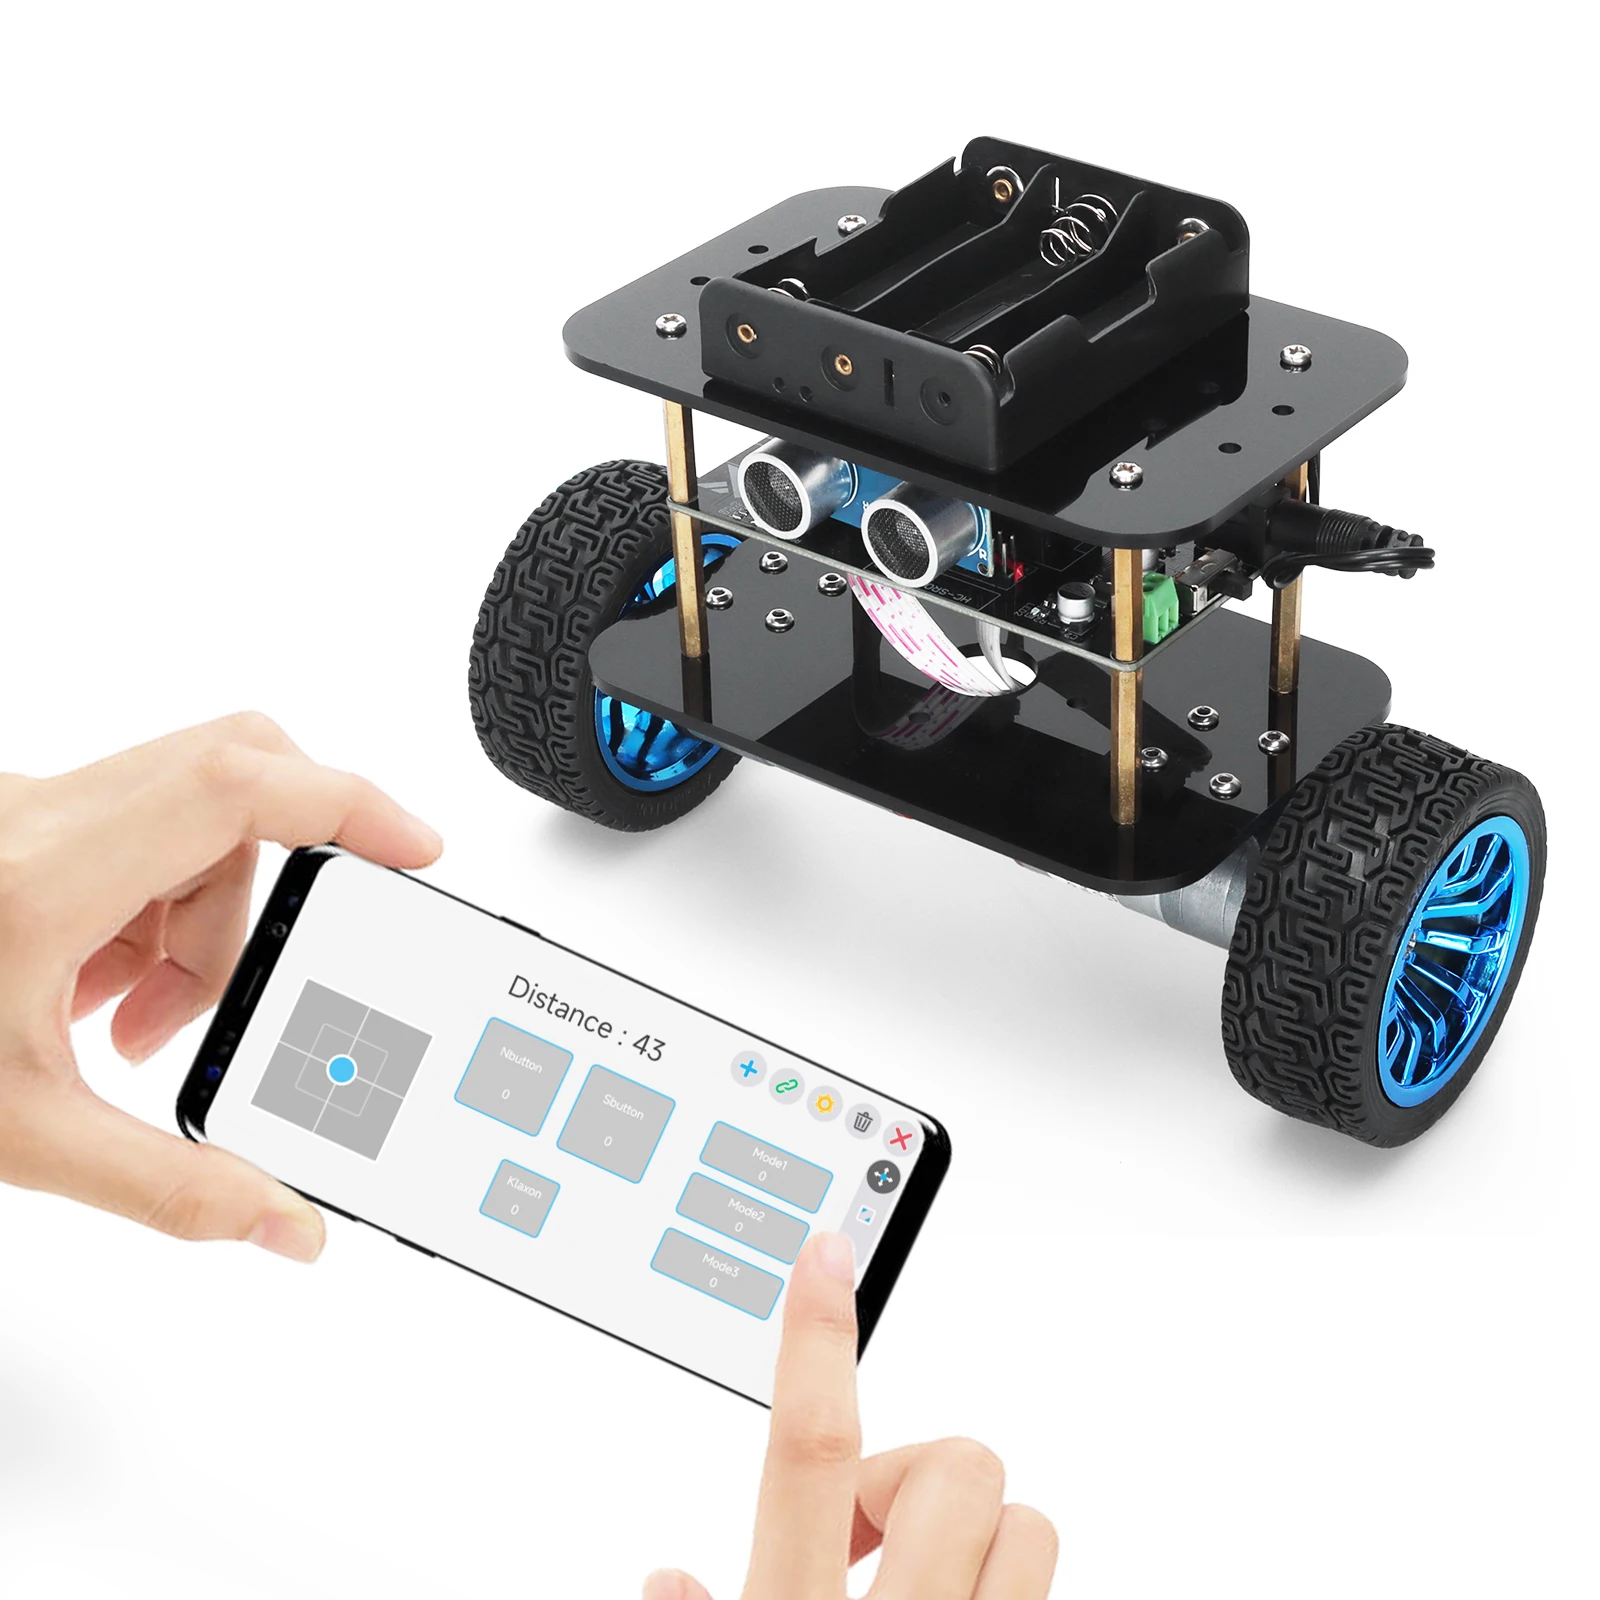 Smart Balance Robot Car Kit for Arduino Programming Project Full Version Automation Starter Set for Educational ,+e-Instructions